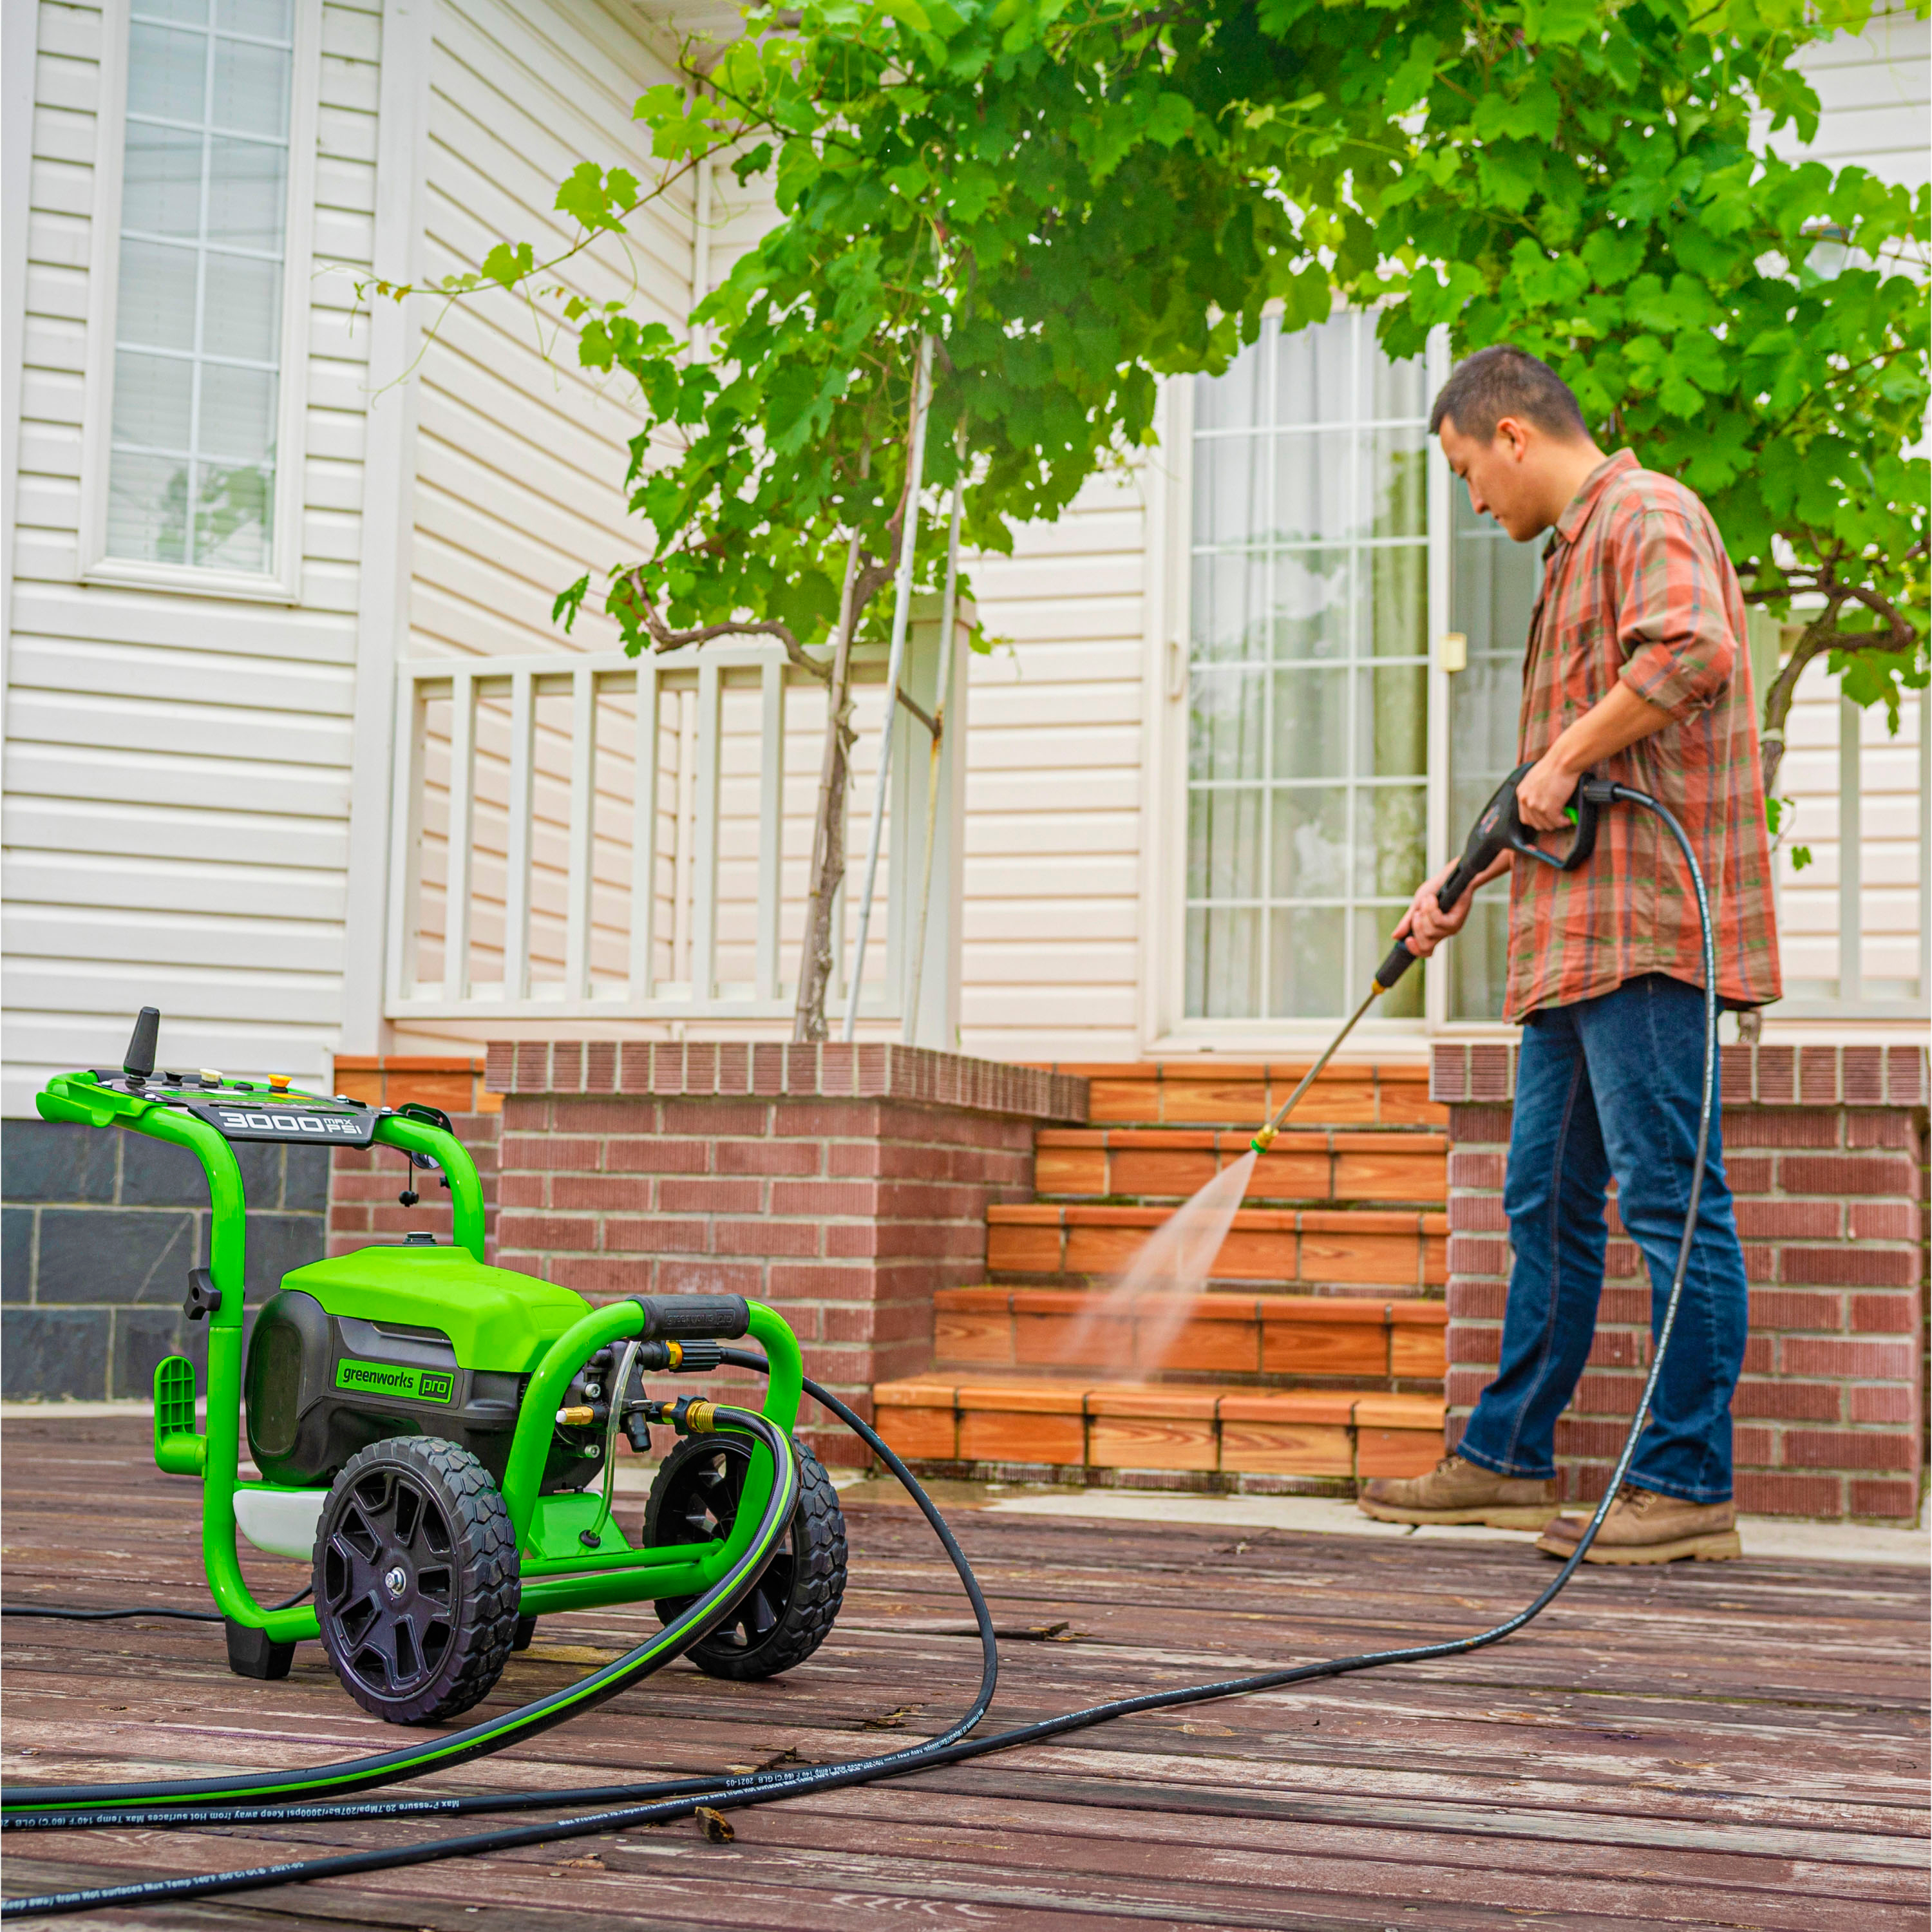 Left View: Greenworks - Pro Electric Pressure Washer up to 3000 PSI at 2.0 GPM - Green